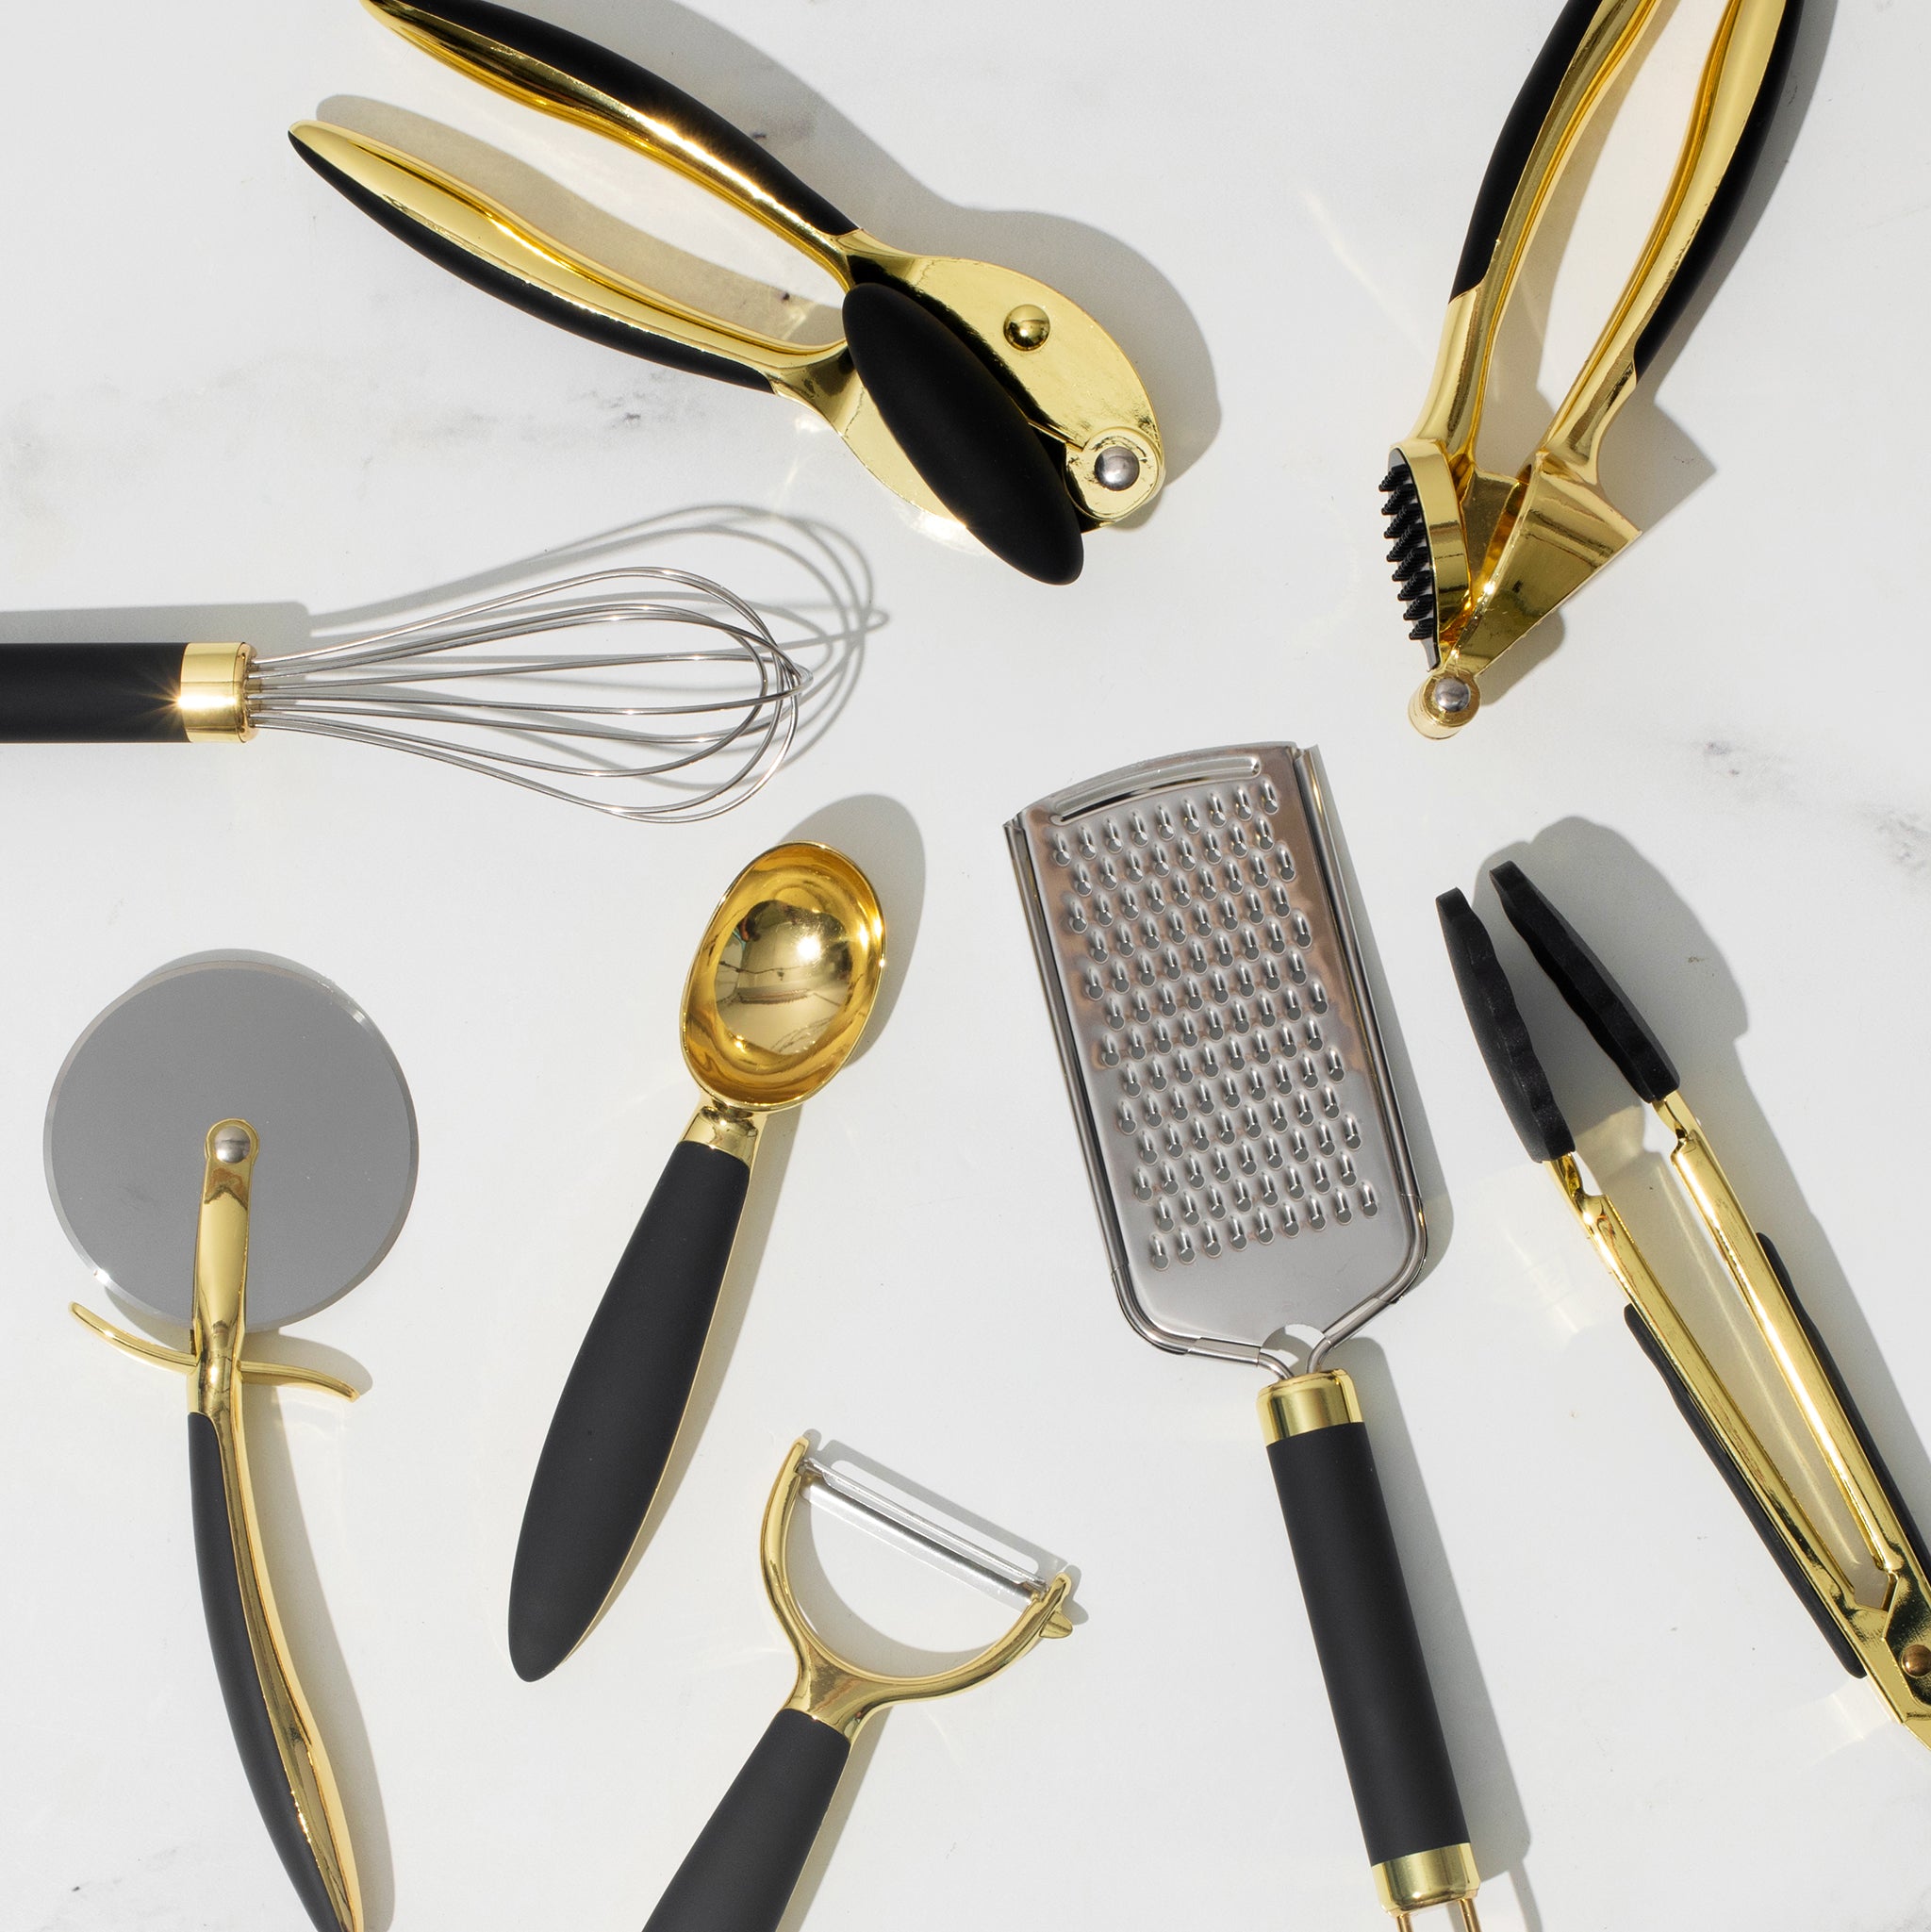 .com: White & Gold Kitchen Tools and Gadgets - Luxe 8PC